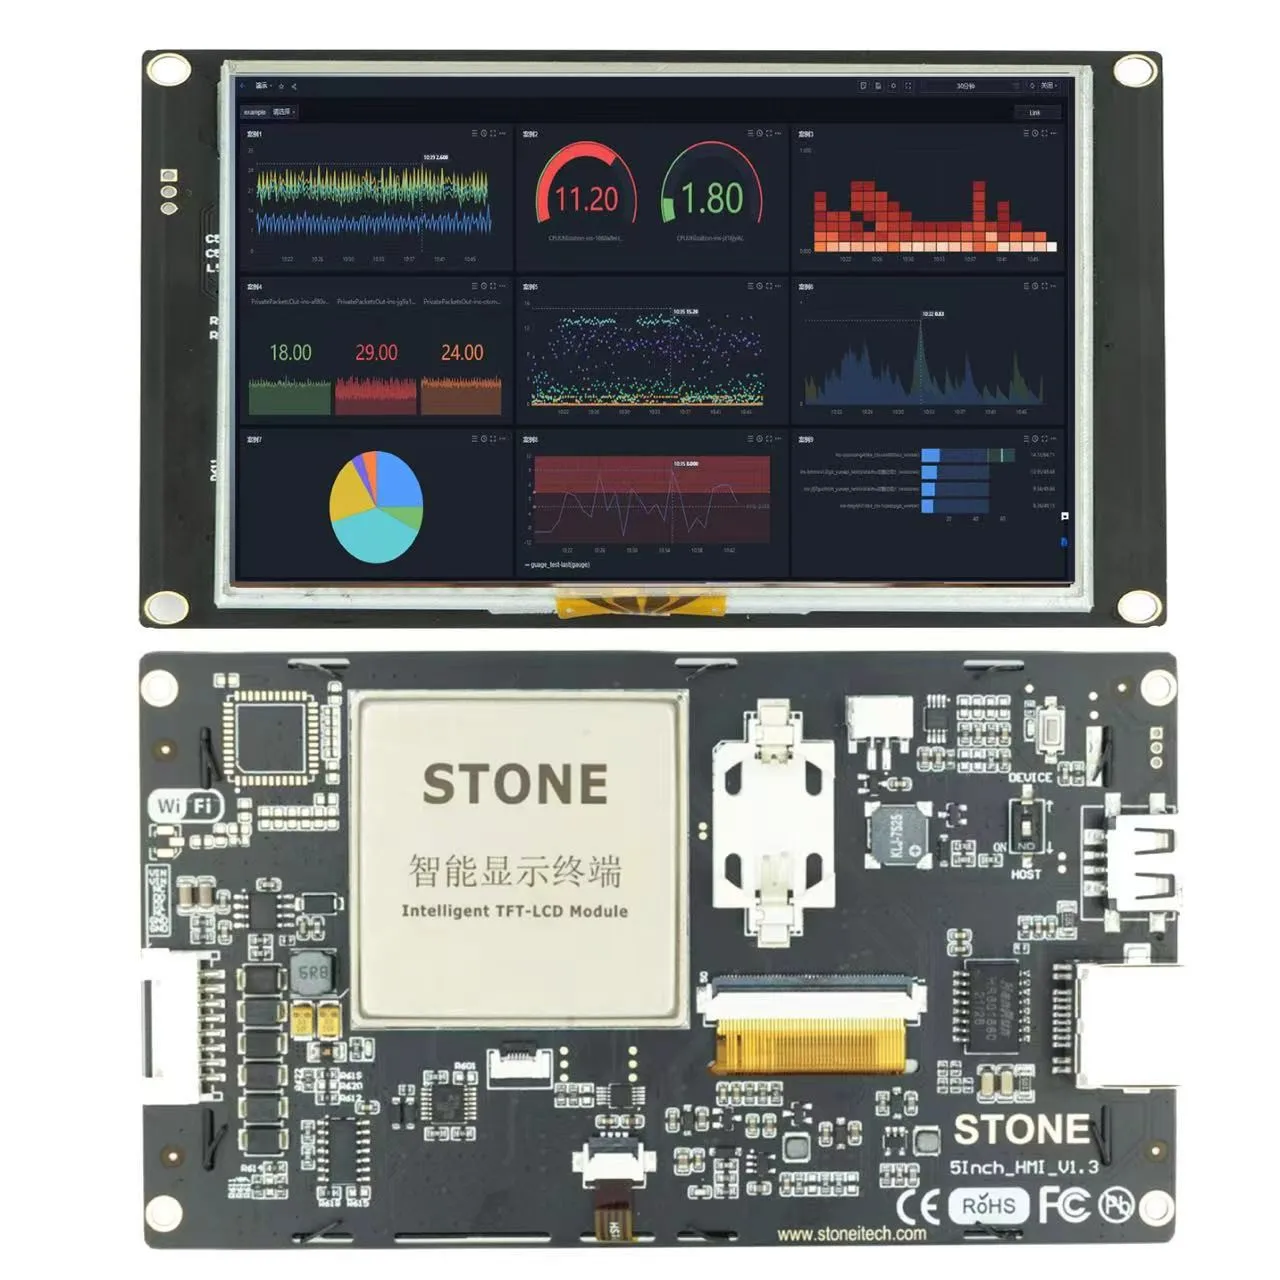 Stone 5 TFT Screen Fully compatible with RS232/TTL UART Interface & USB port RS232/RS422 / RS485/ TTL / LAN port Wi-Fi